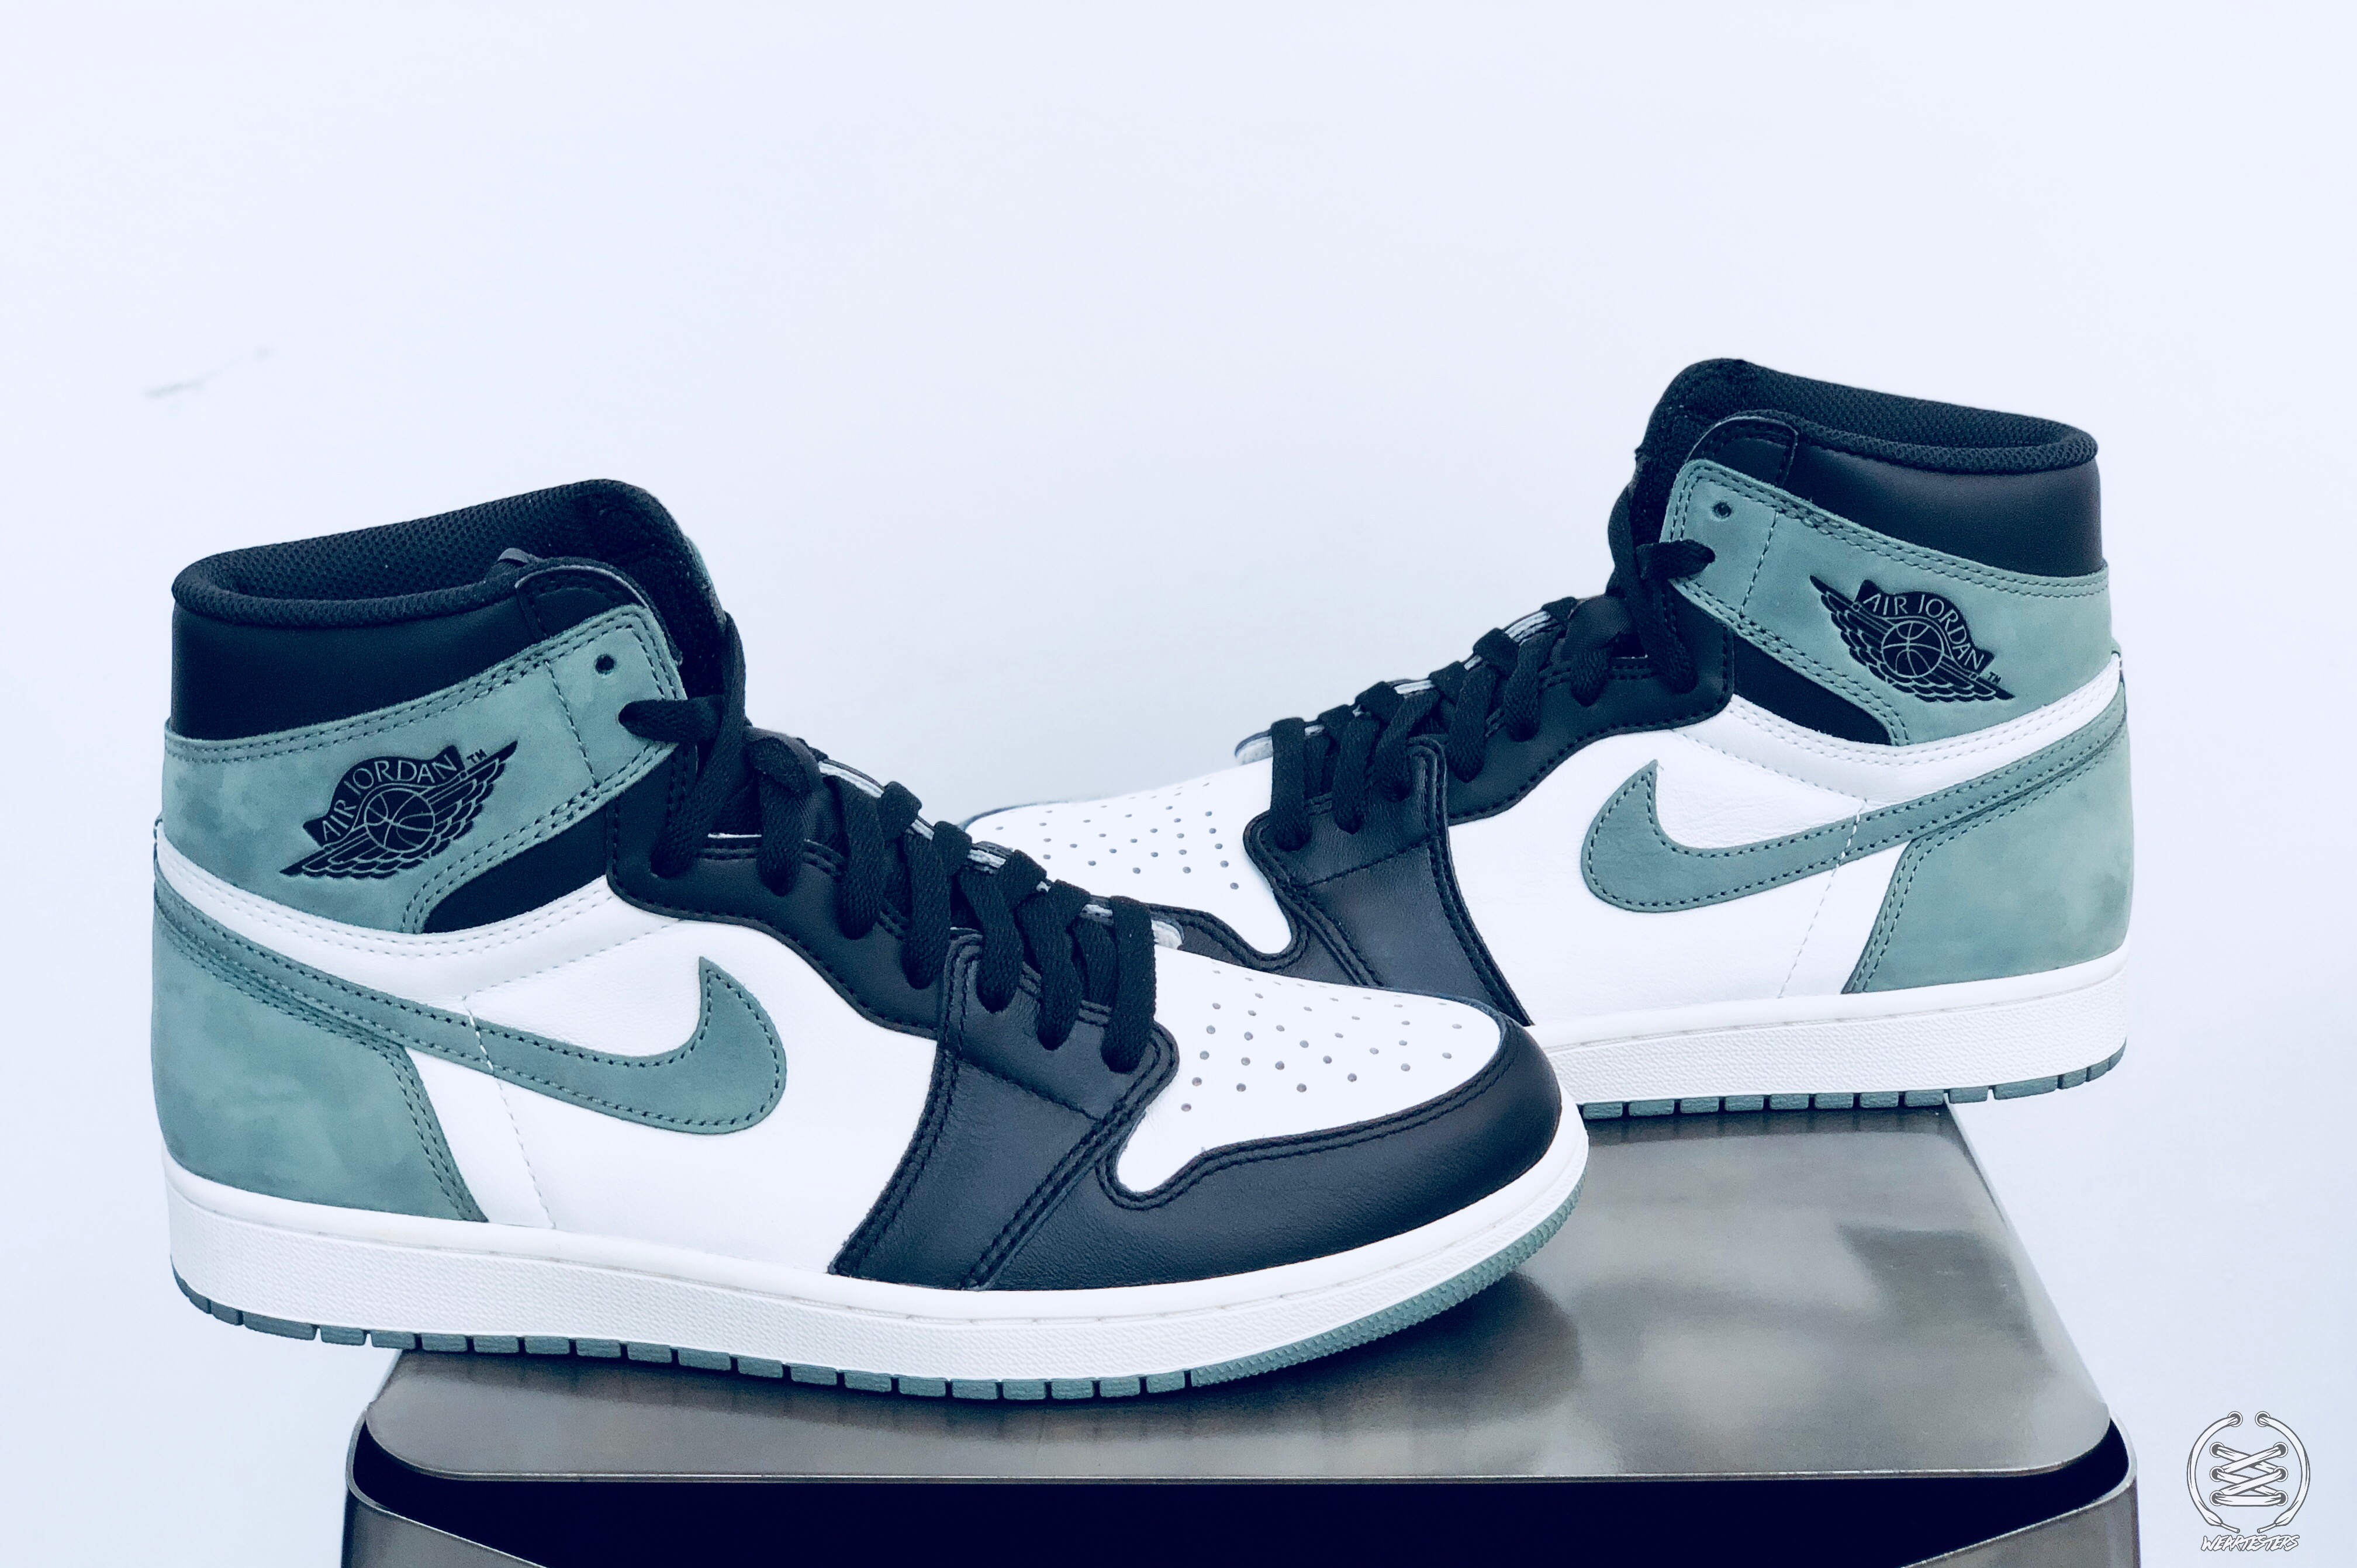 Air Jordan 1 Clay Green Best Hand in the Game collection 3